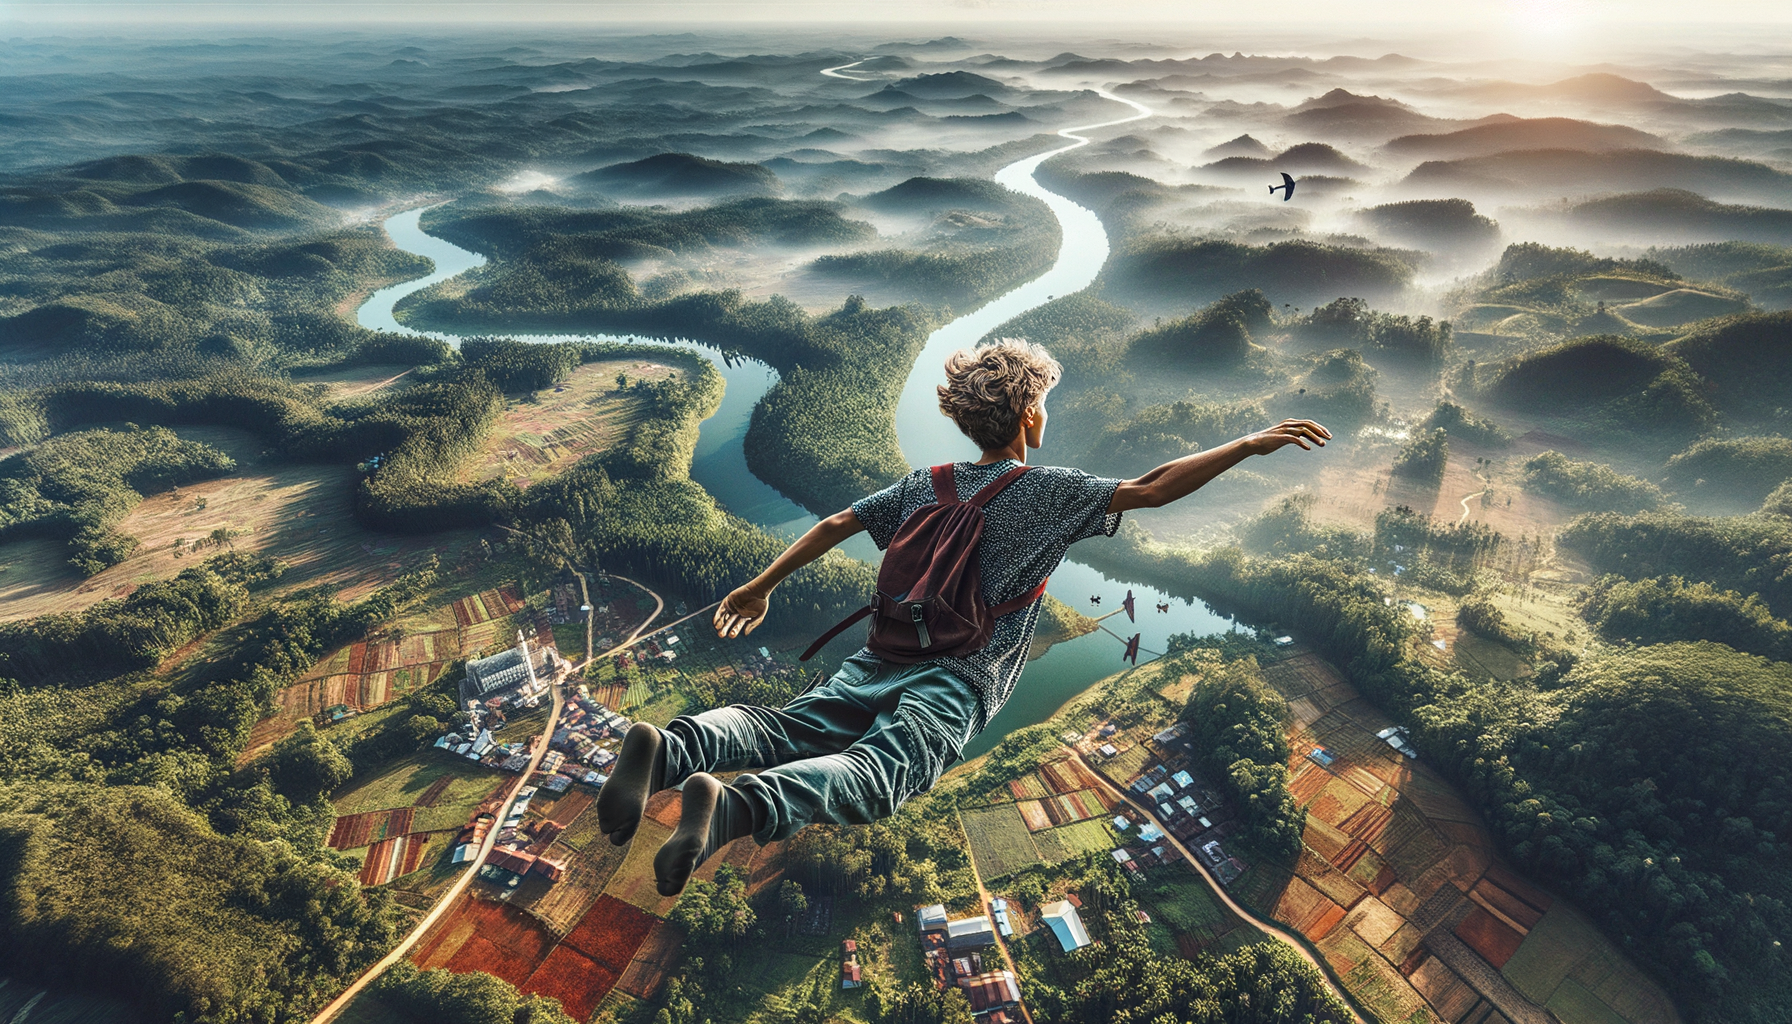 a young boy fly in the sky and eyebird the land, can see the forest, roads, river, hills and farms, very details, very relastic